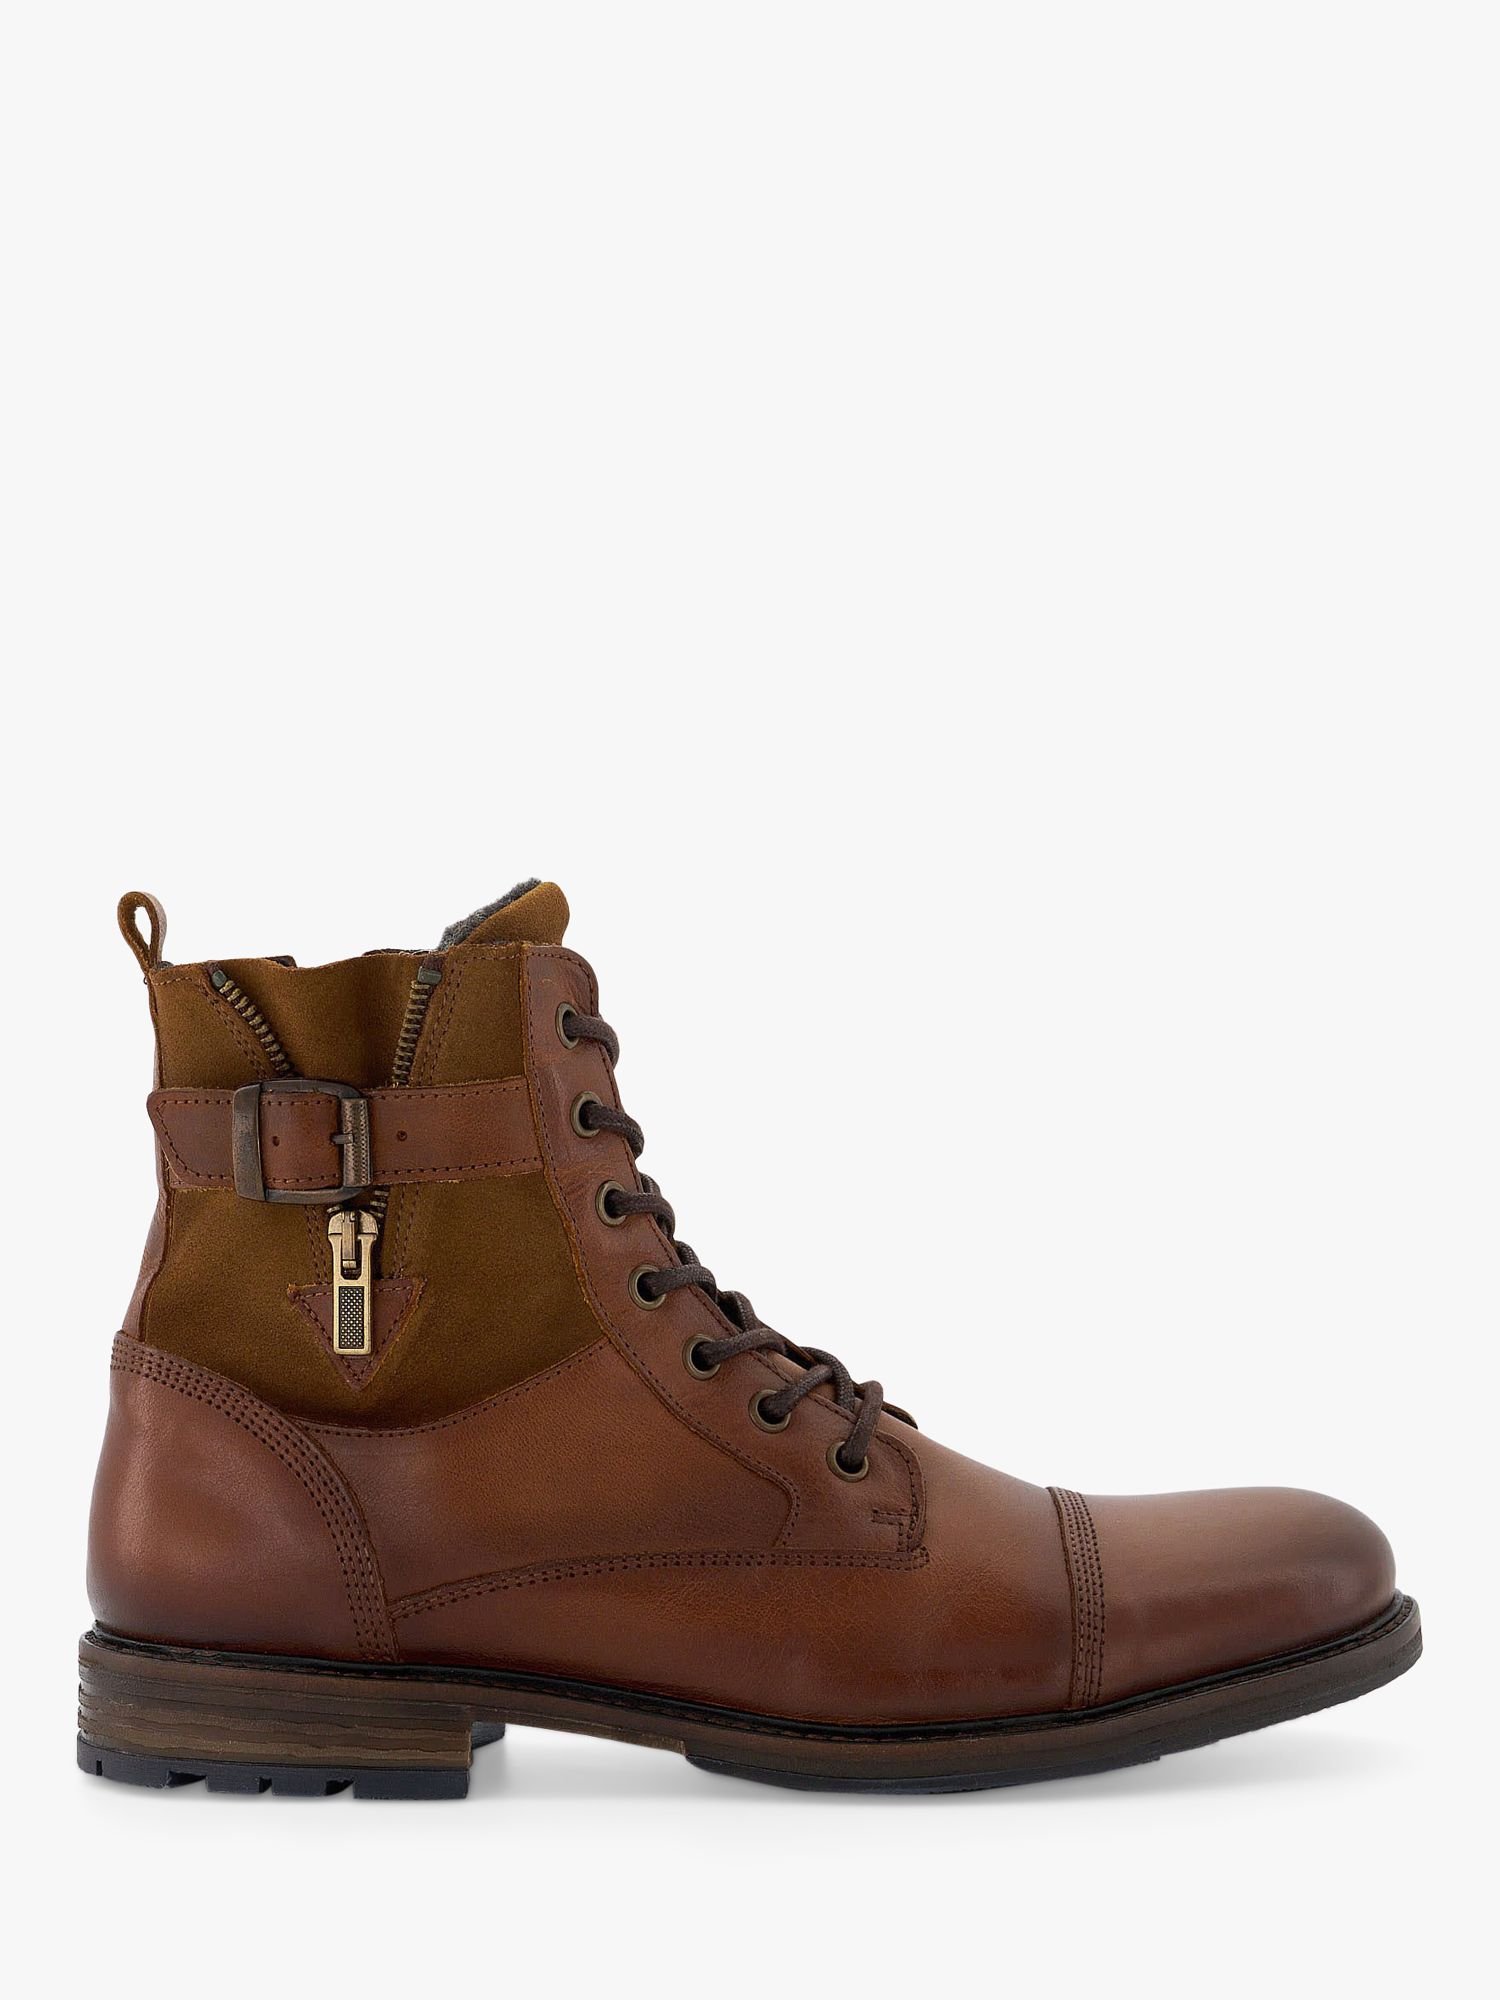 Dune Wide Fit Pap Leather Ankle Boots, Tan at John Lewis & Partners